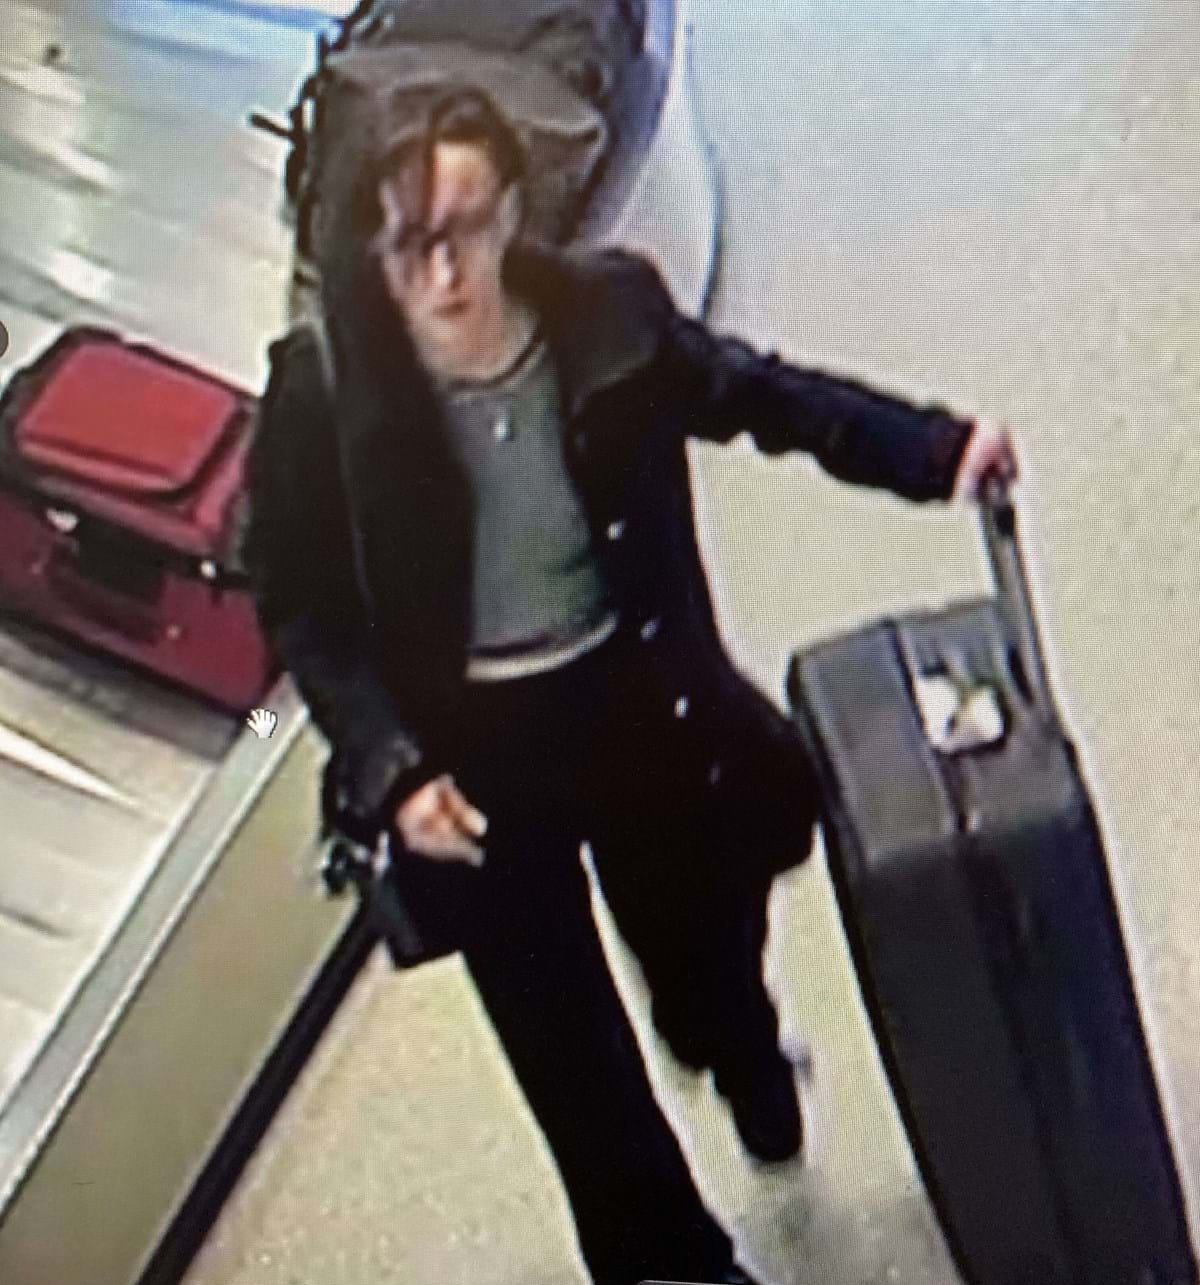 woman with dark hair and glasses walking in airport with black luggage